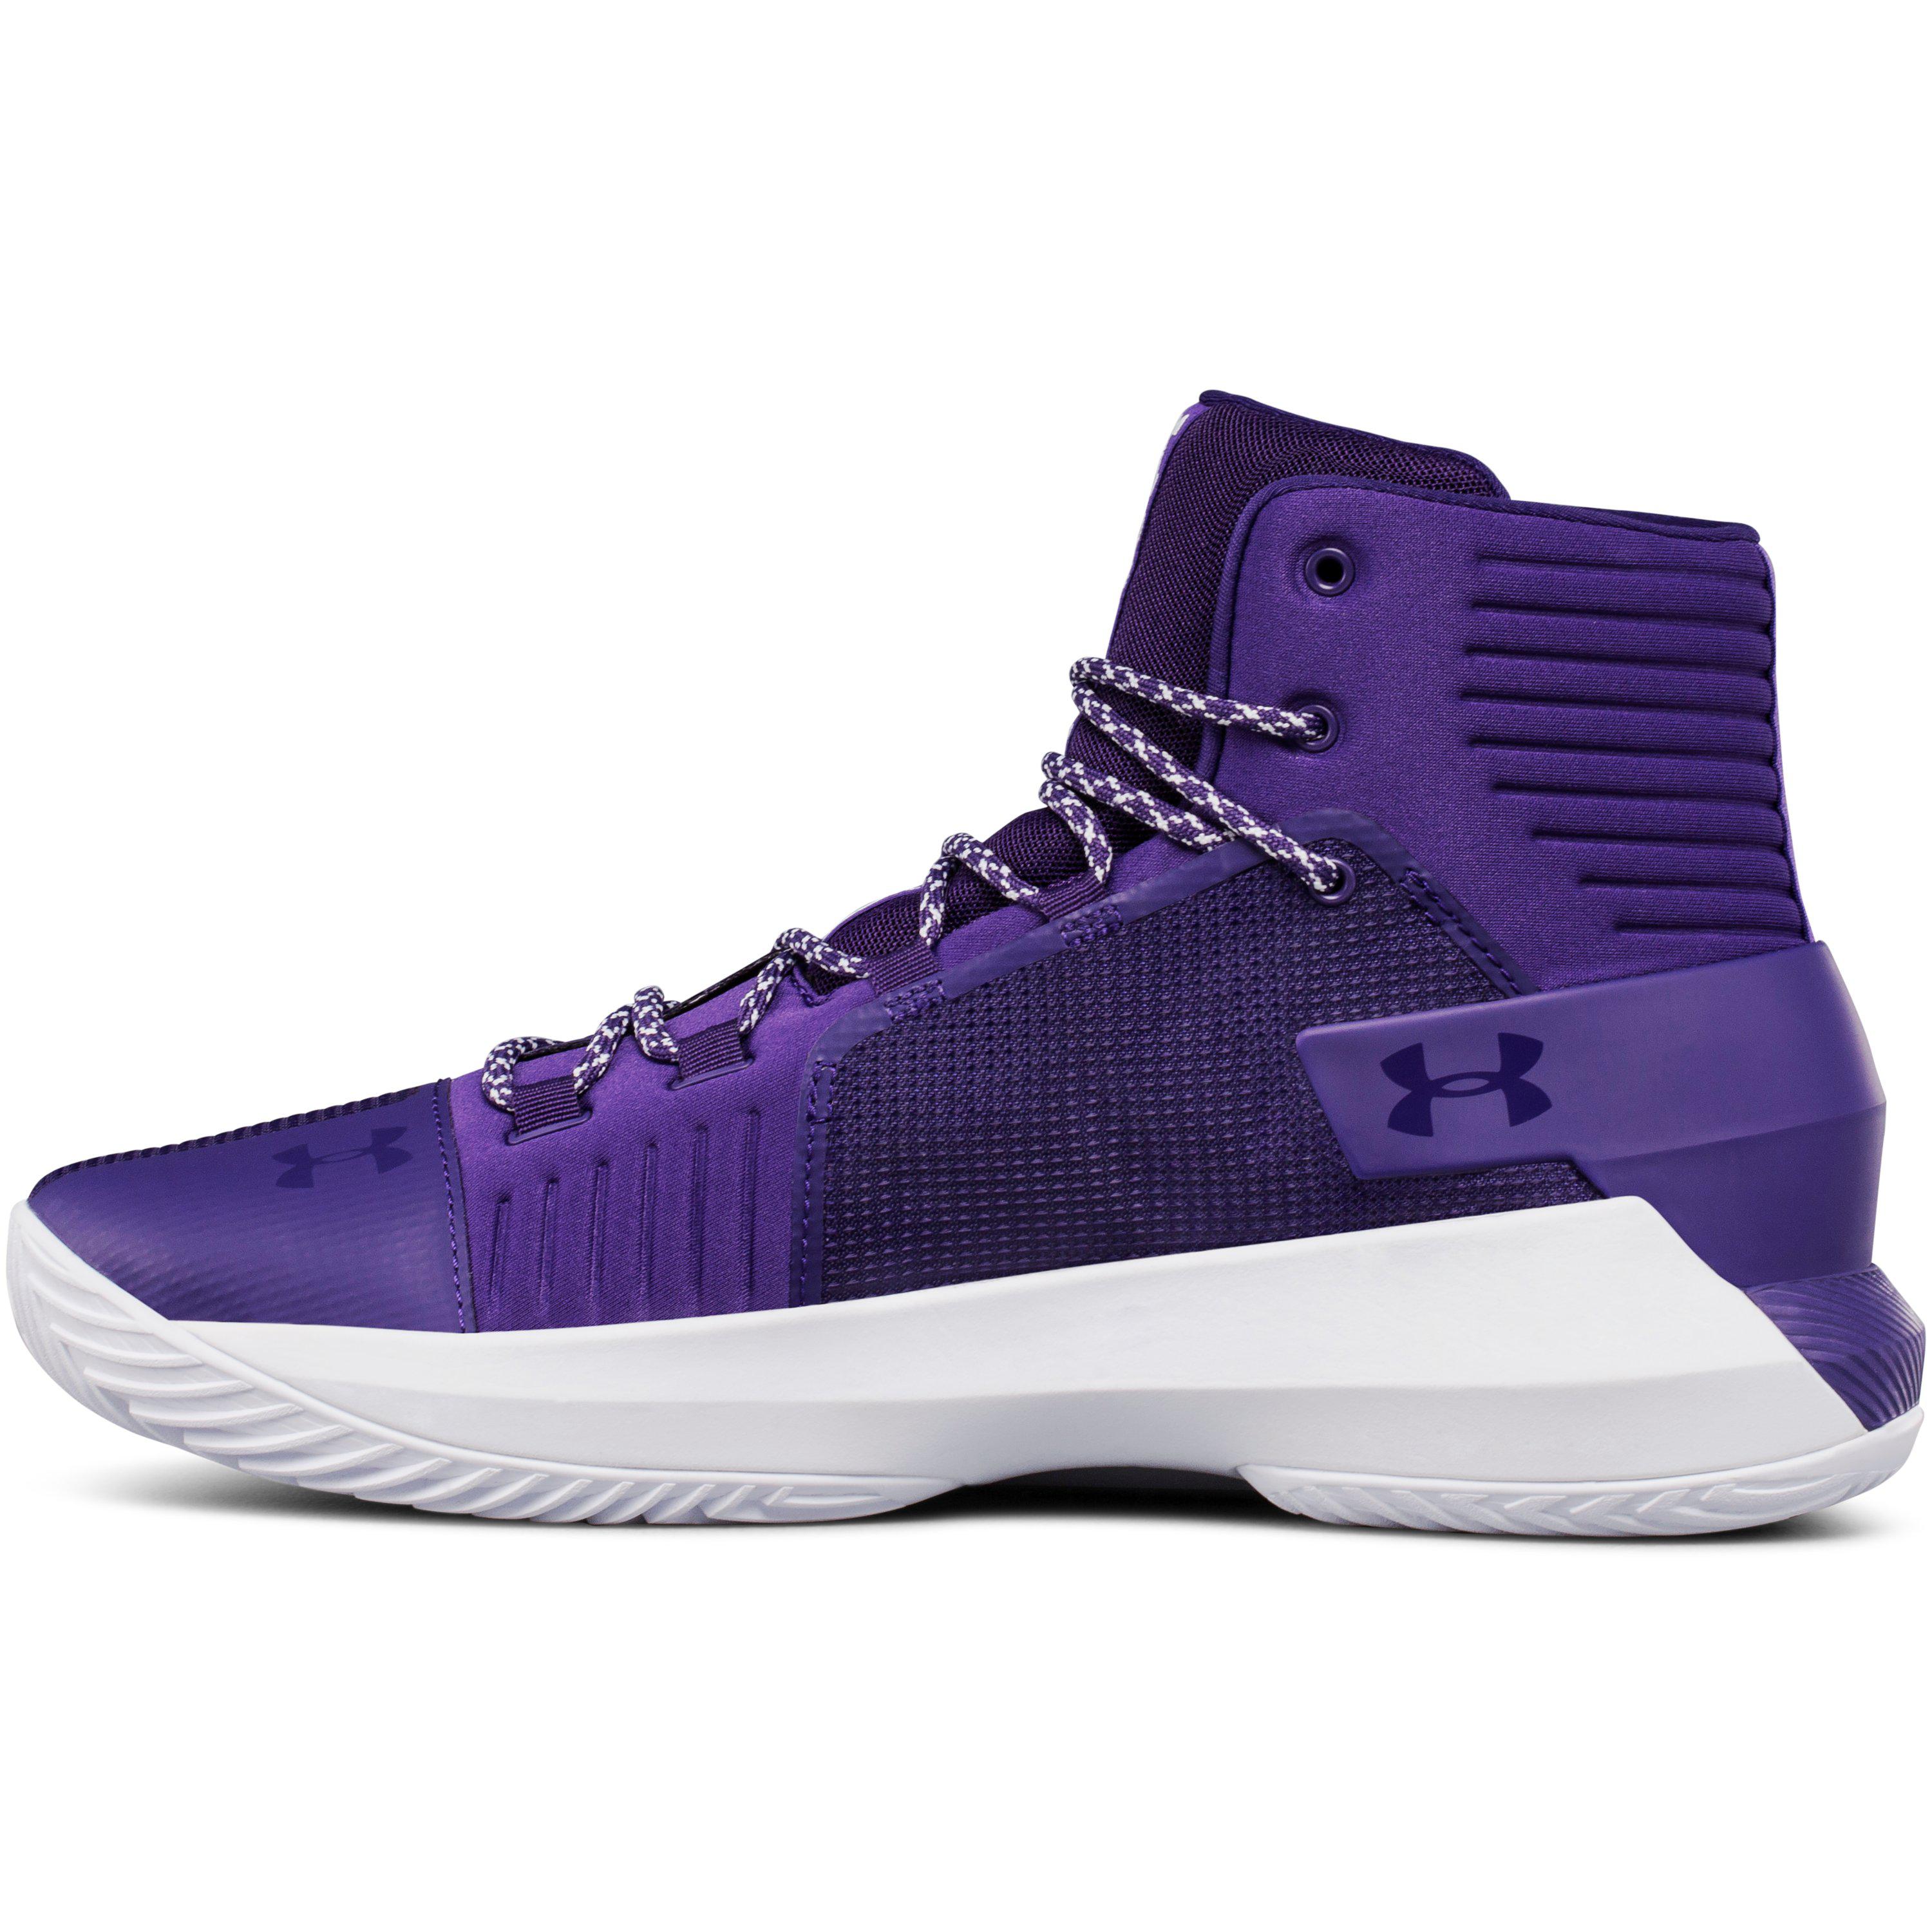 Under Armour Lace Men's Ua Team Drive 4 Basketball Shoes in Purple ...